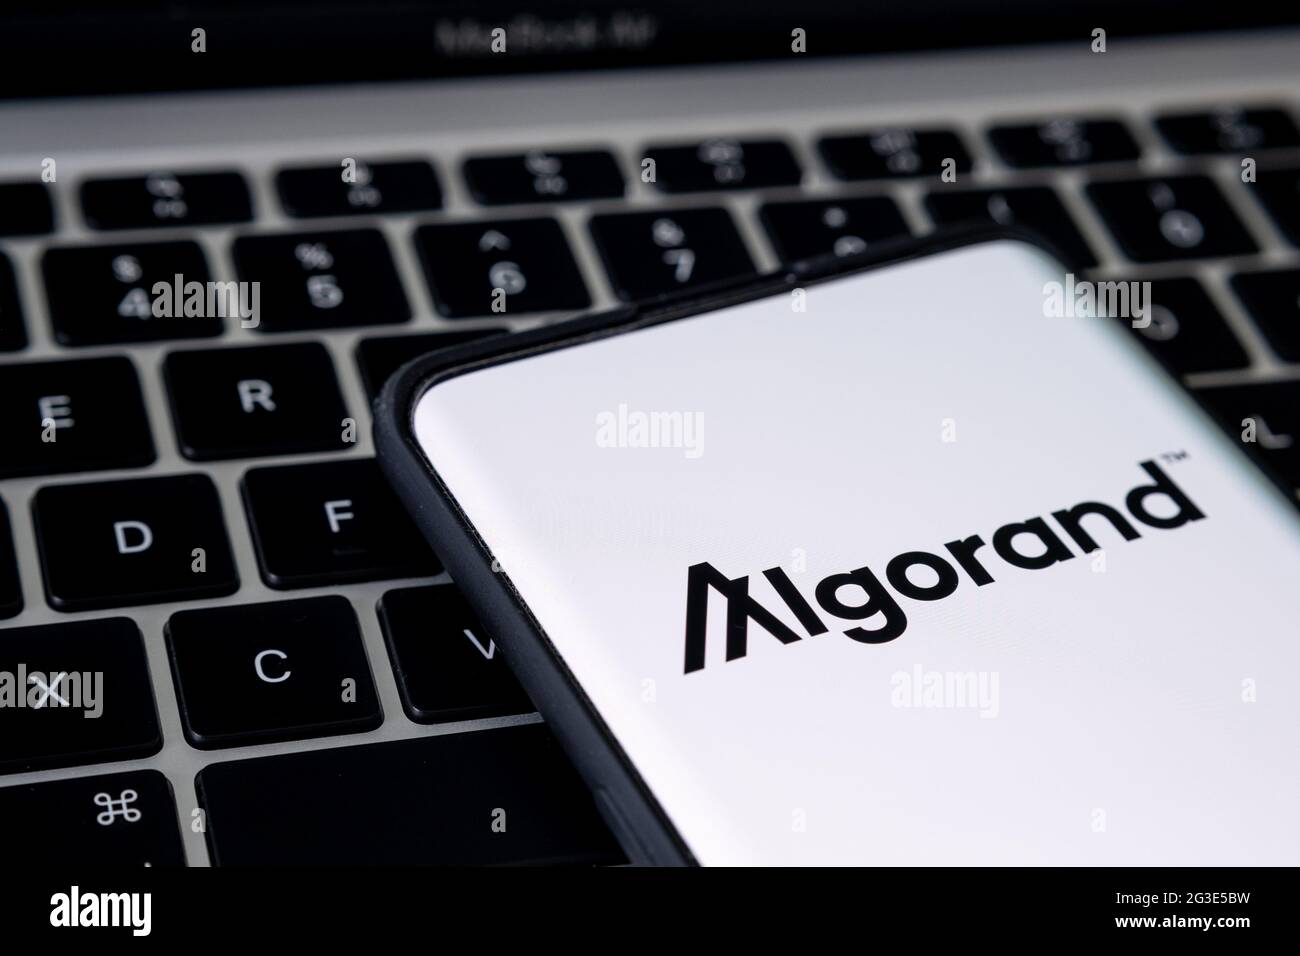 Algorand cryptocurrency platform logo seen on smartphone placed on keyboard of laptop. Concept. Stafford, United Kingdom, June 16, 2021. Stock Photo